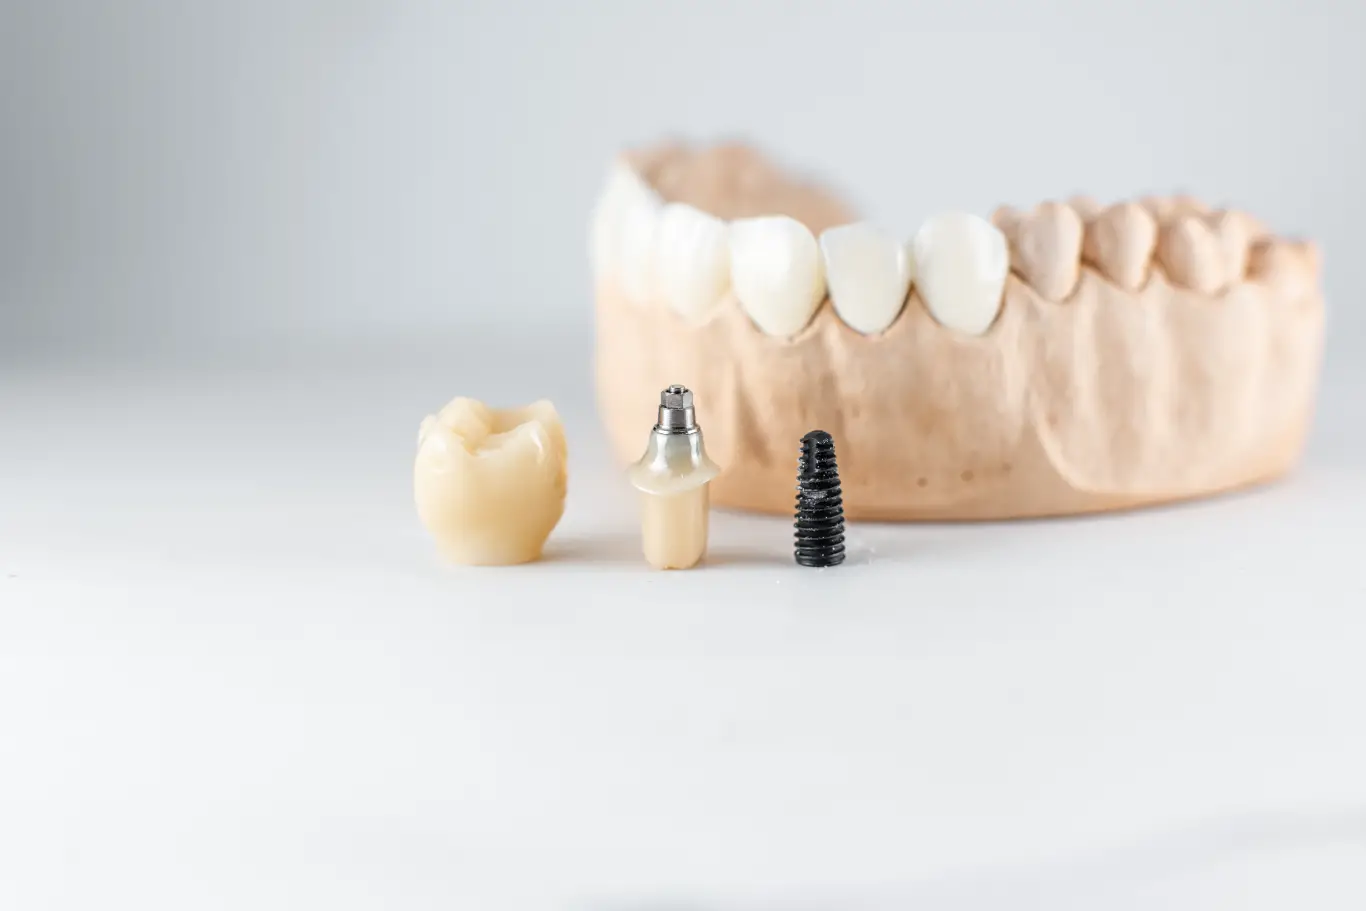 Model of an artificial jaw and dental implant